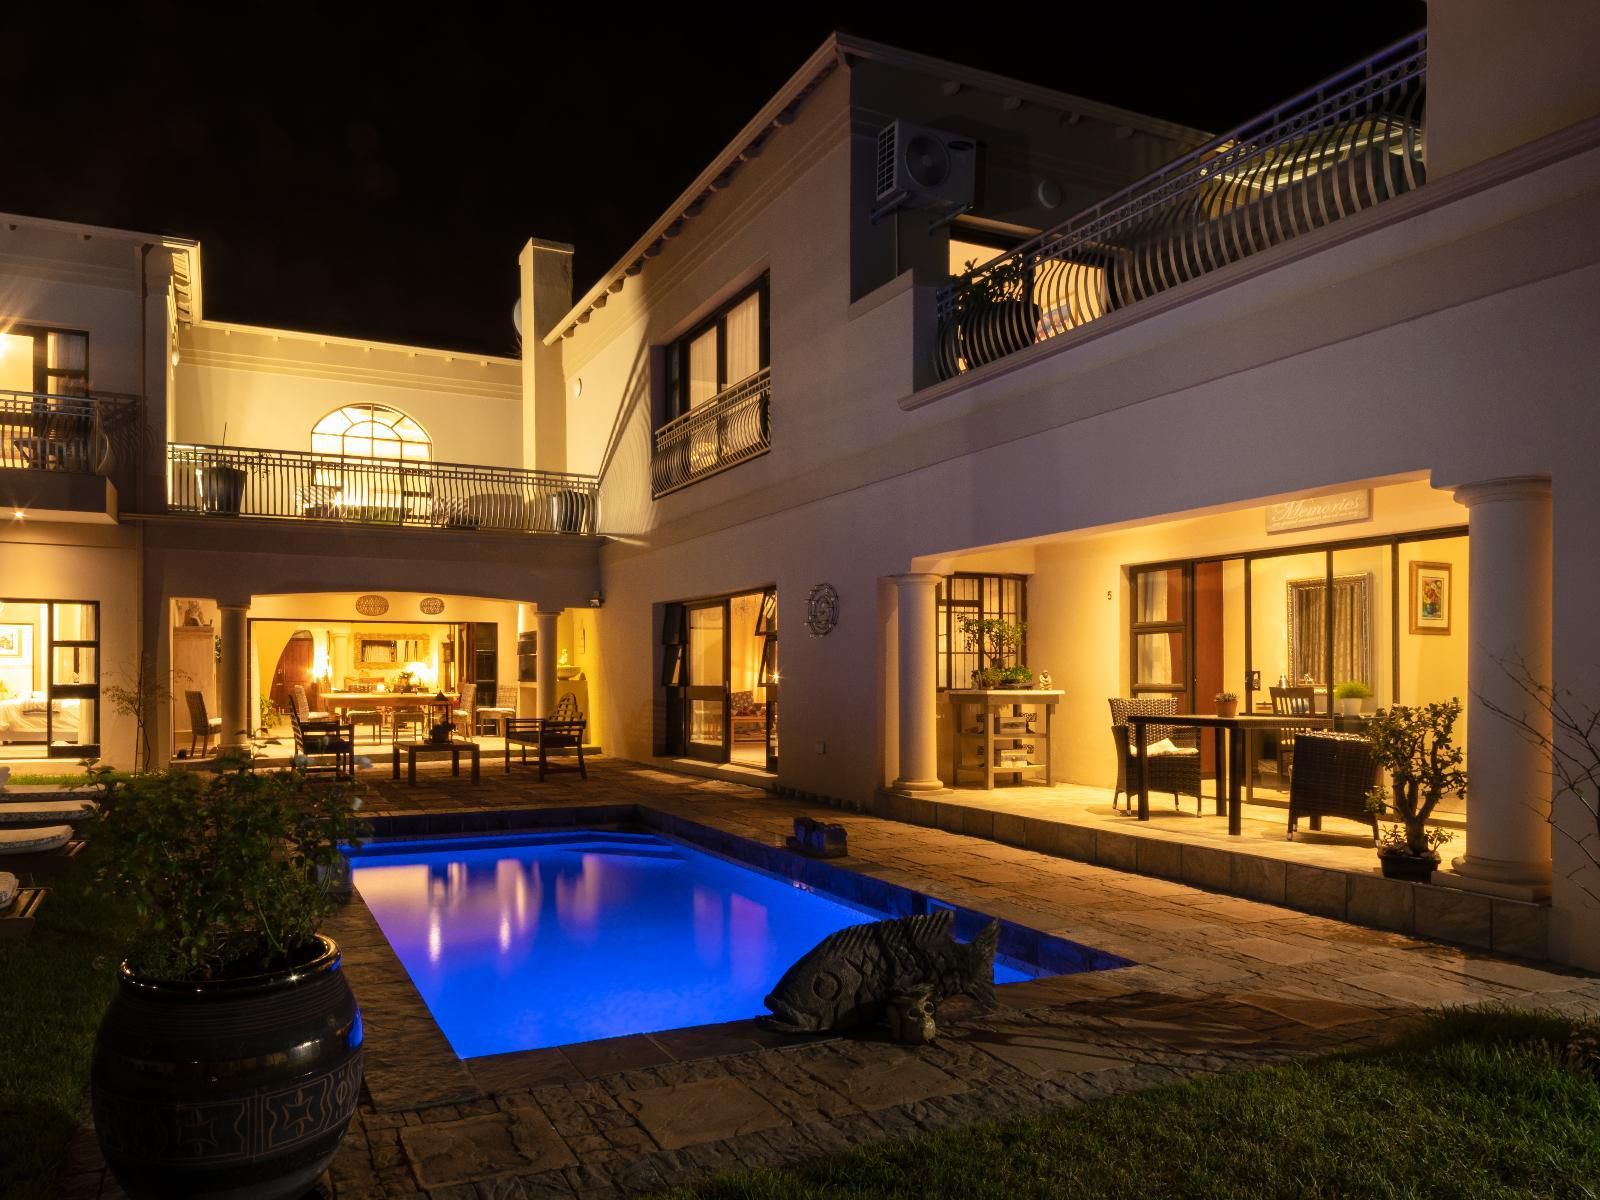 Amery House Summerstrand Port Elizabeth Eastern Cape South Africa House, Building, Architecture, Swimming Pool